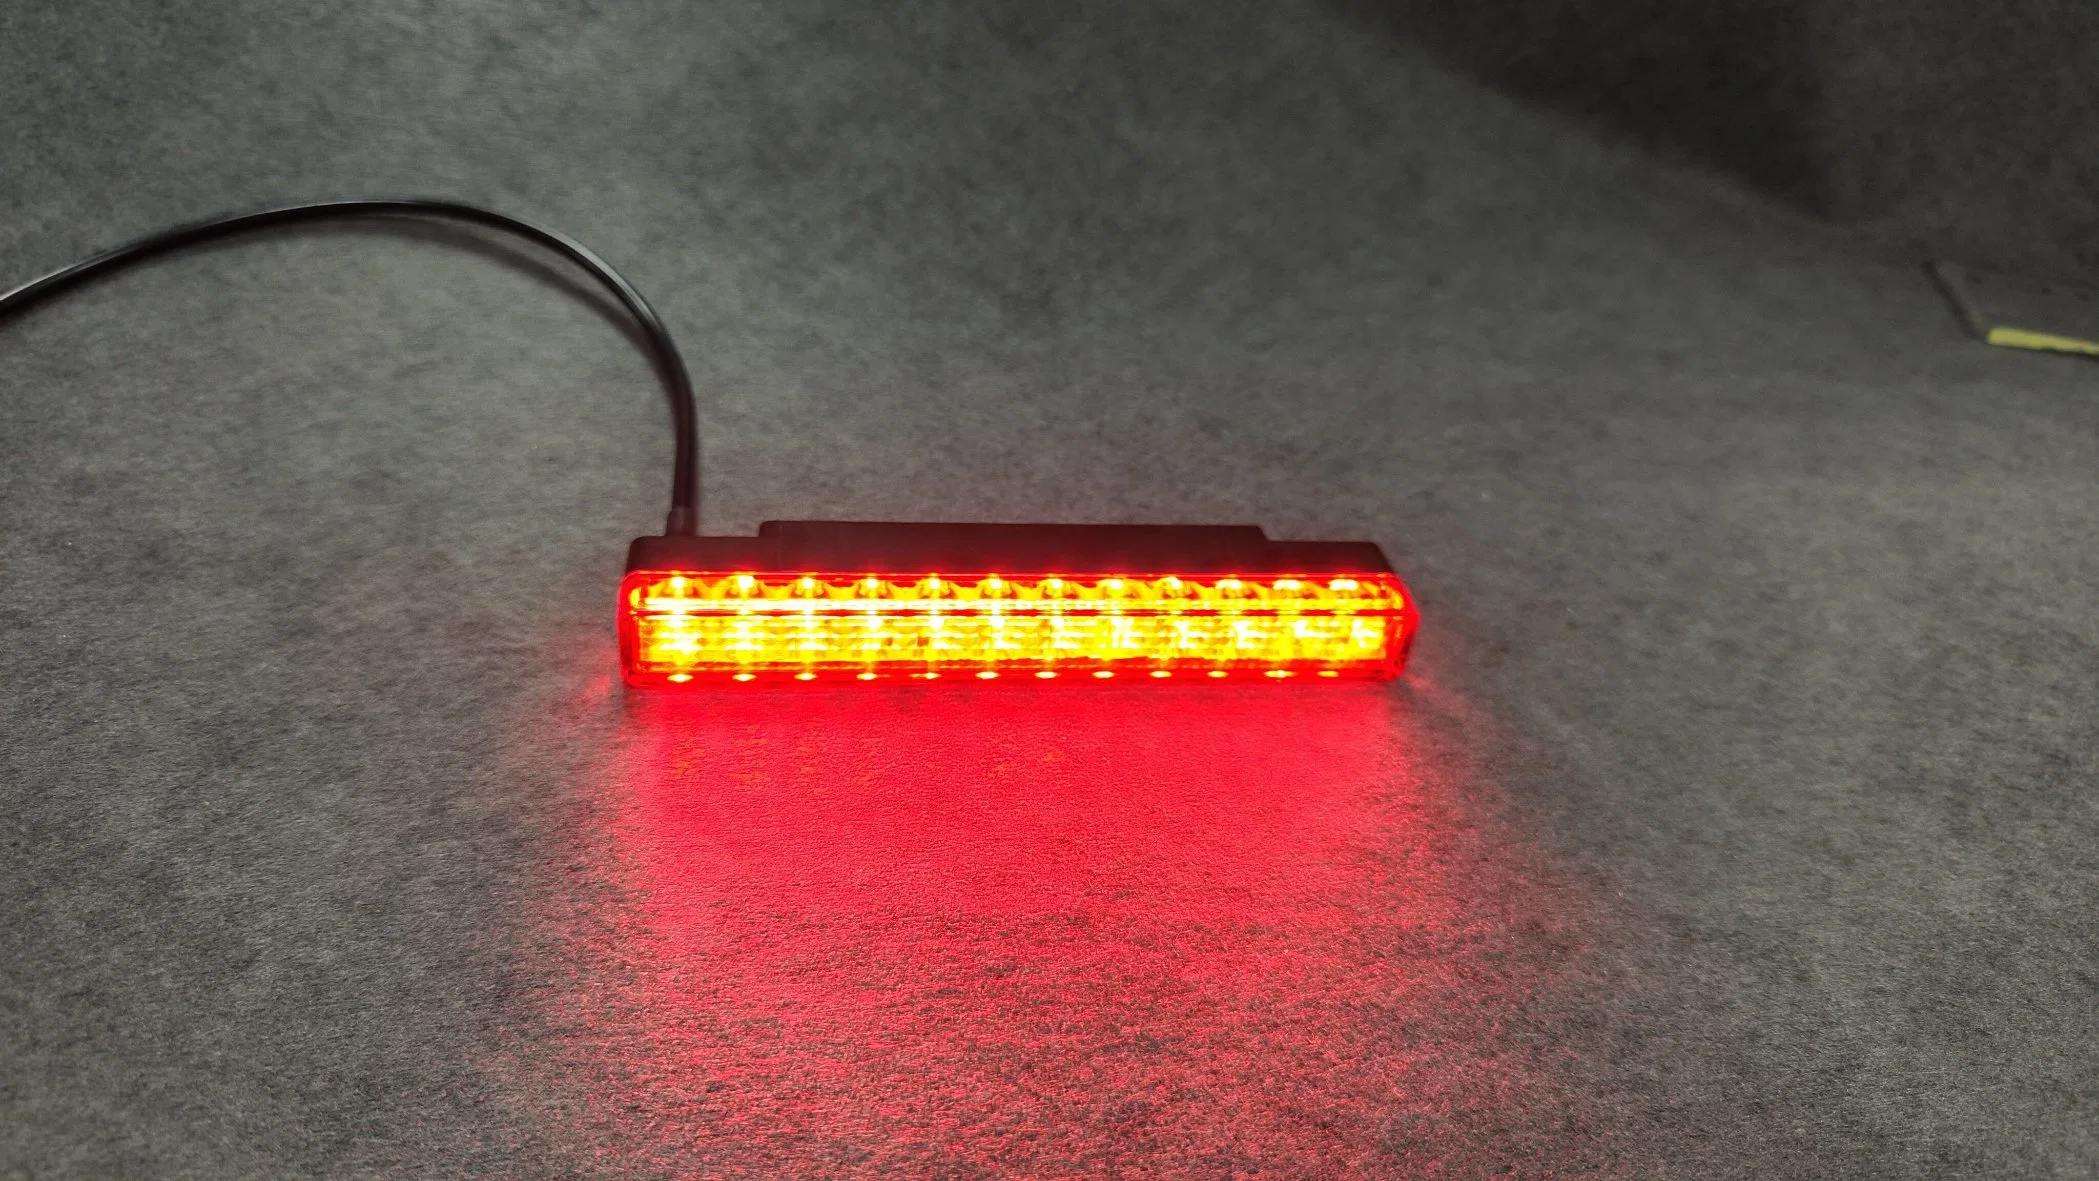 Rectangular LED Tail Light Rear Position Lamp for Motorcycle Scooter of Lz118